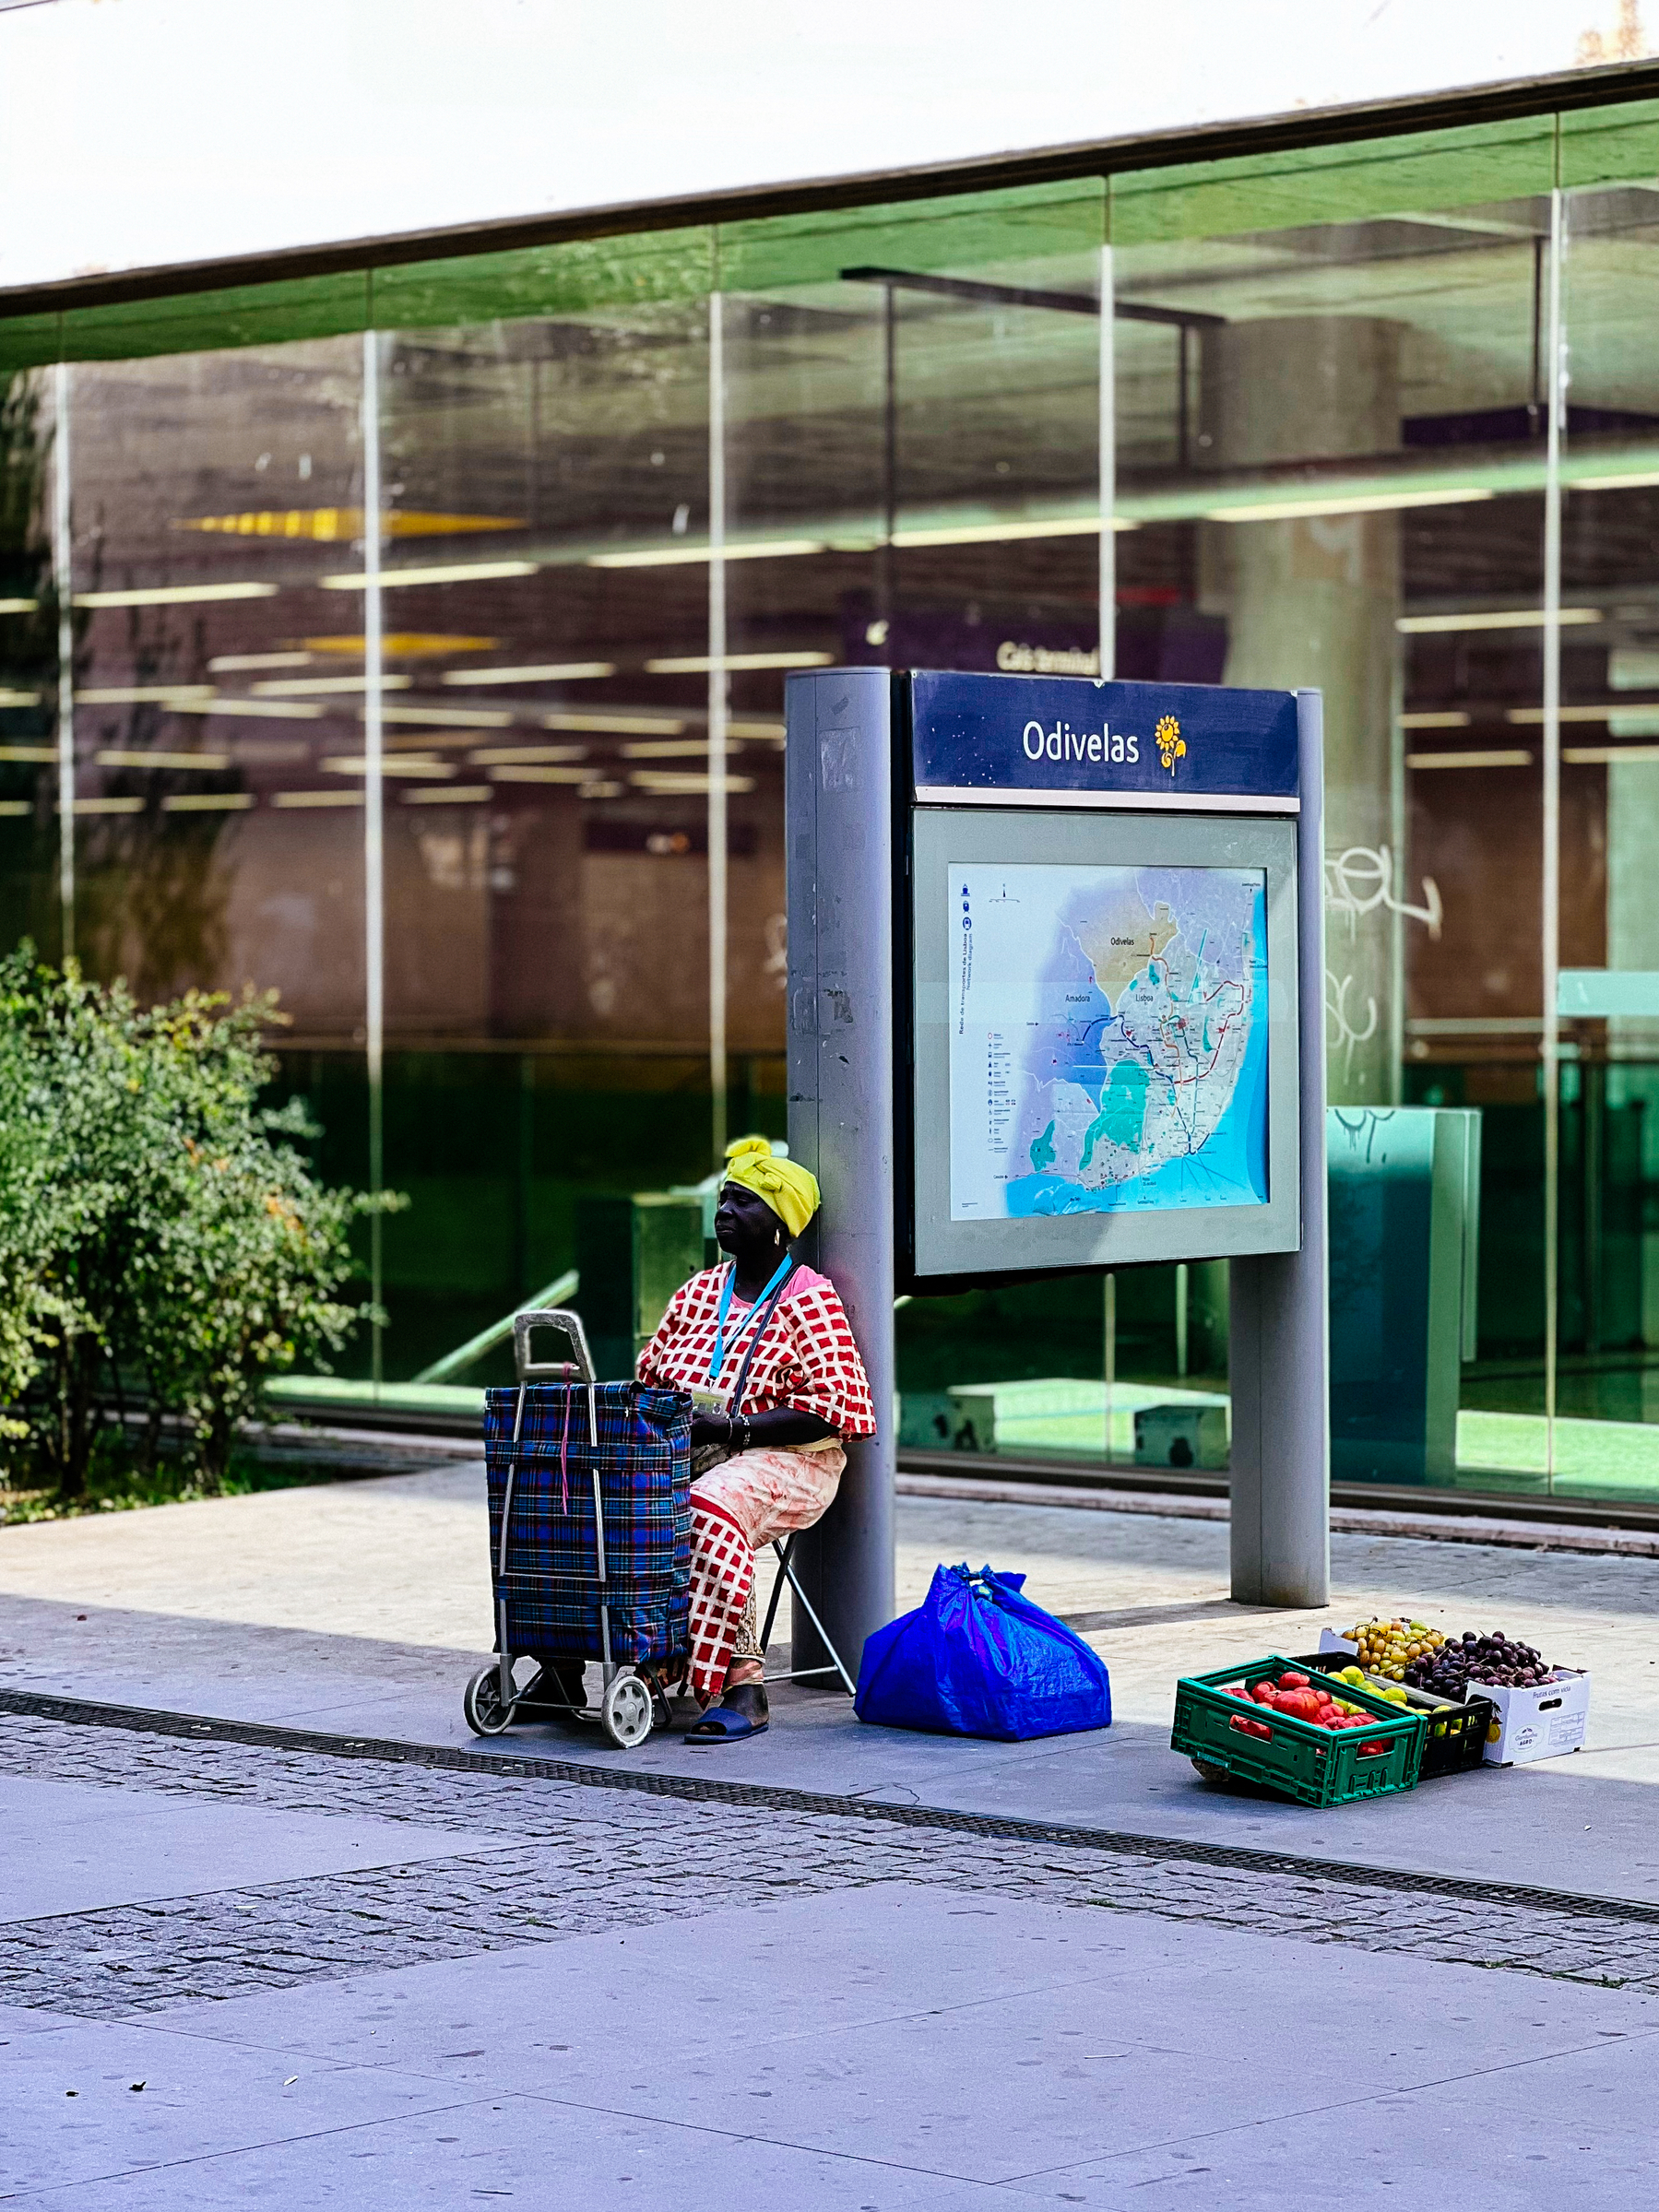 A woman sit in a portable chair, selling fruits and vegetables by the metro station.